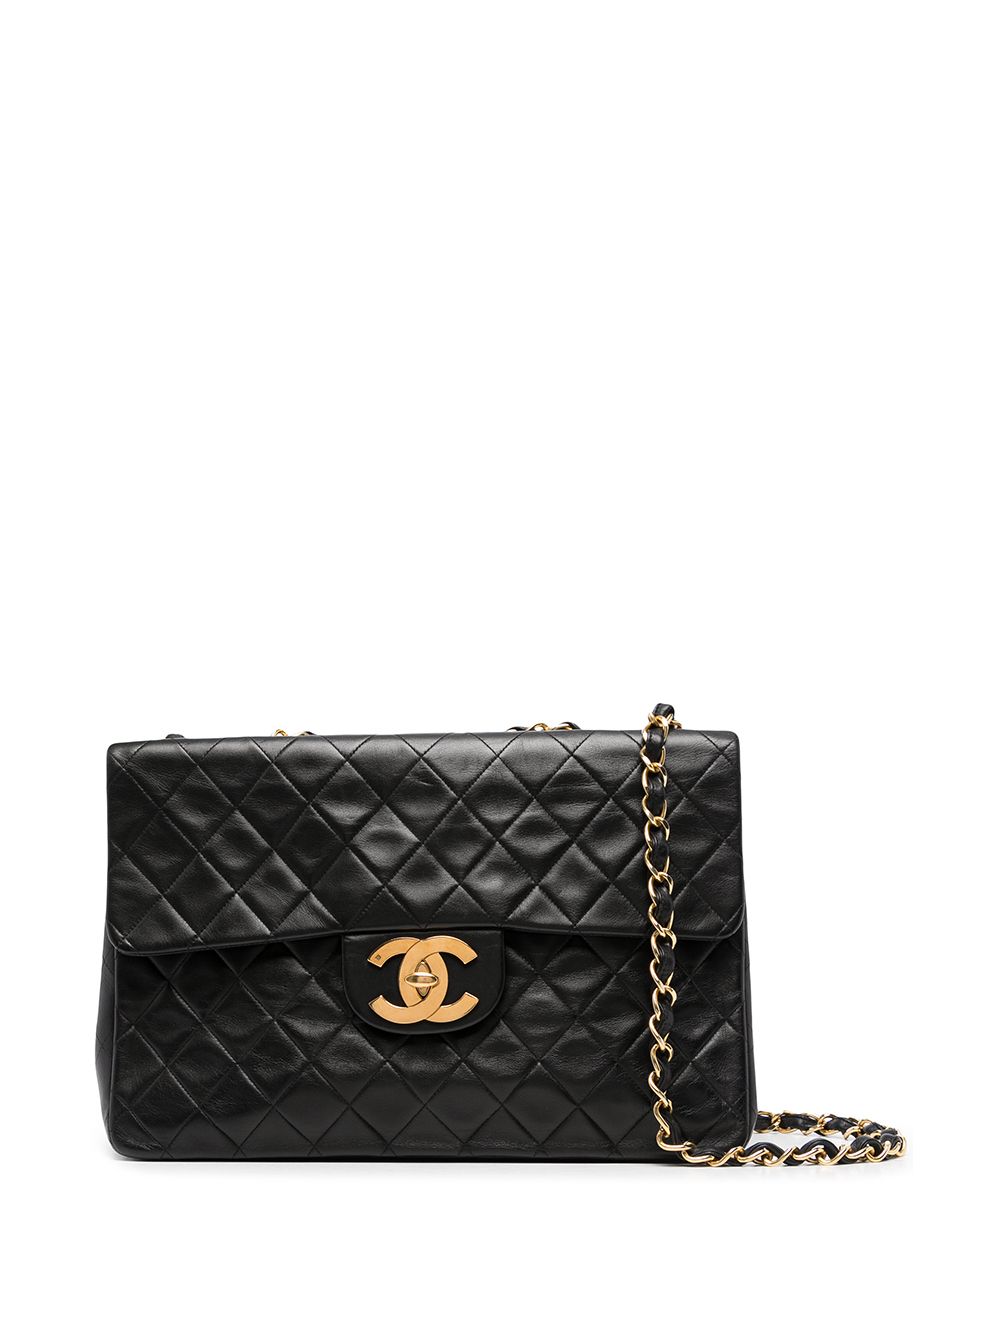 CHANEL Pre-Owned 1994-1996 Diamond-Quilted Camera Bag - Black for Women